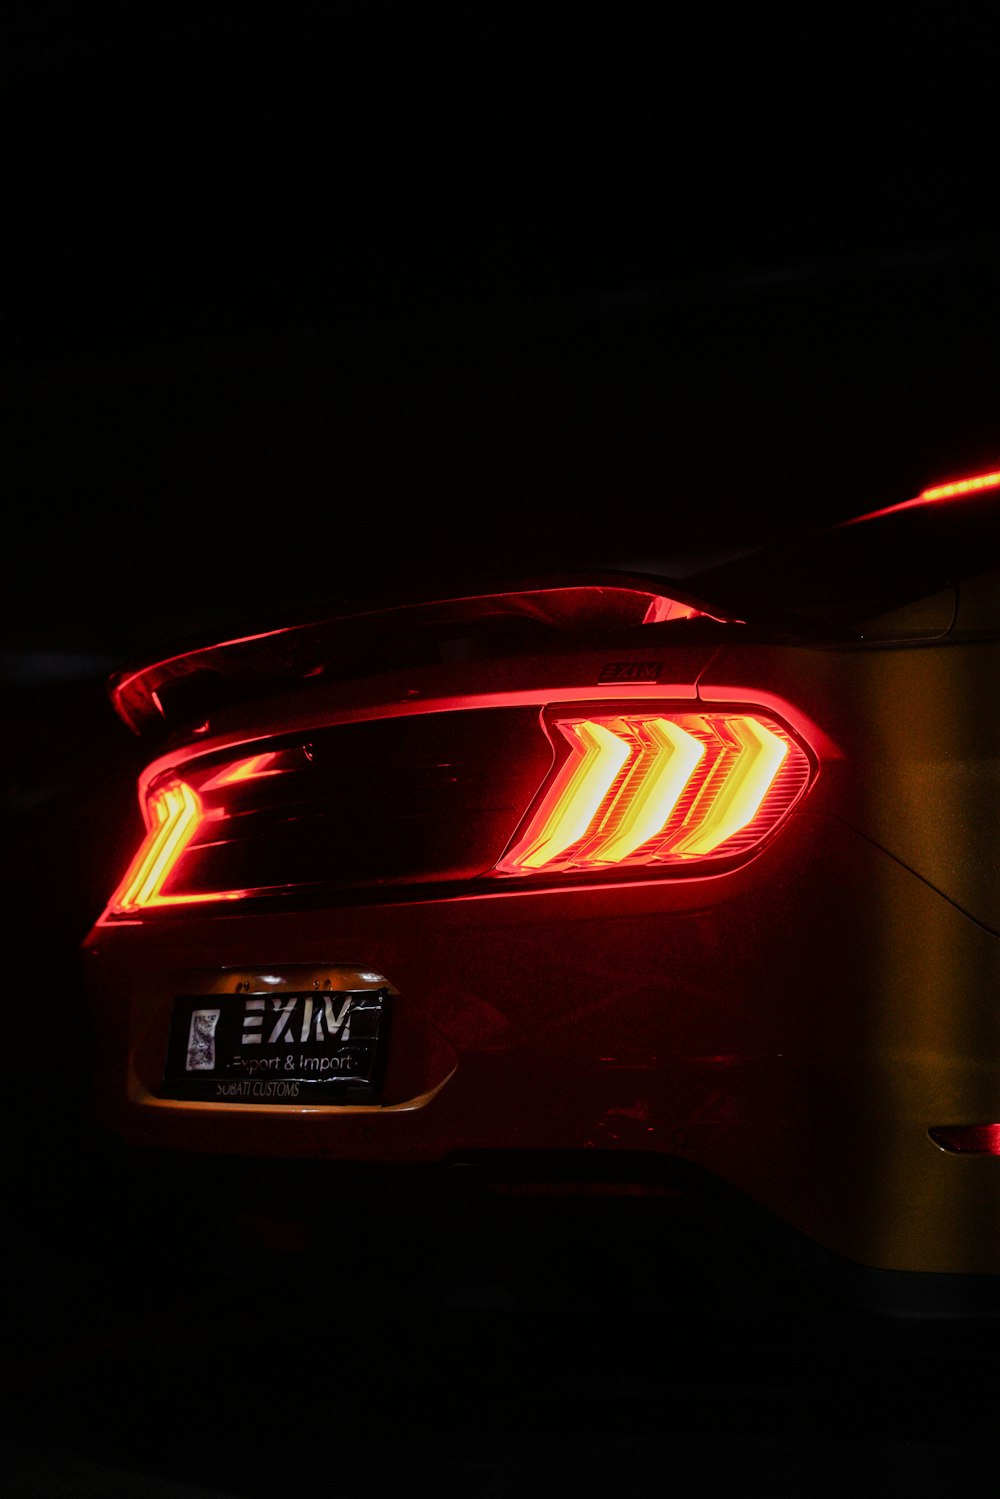 the tail lights of a car in the dark